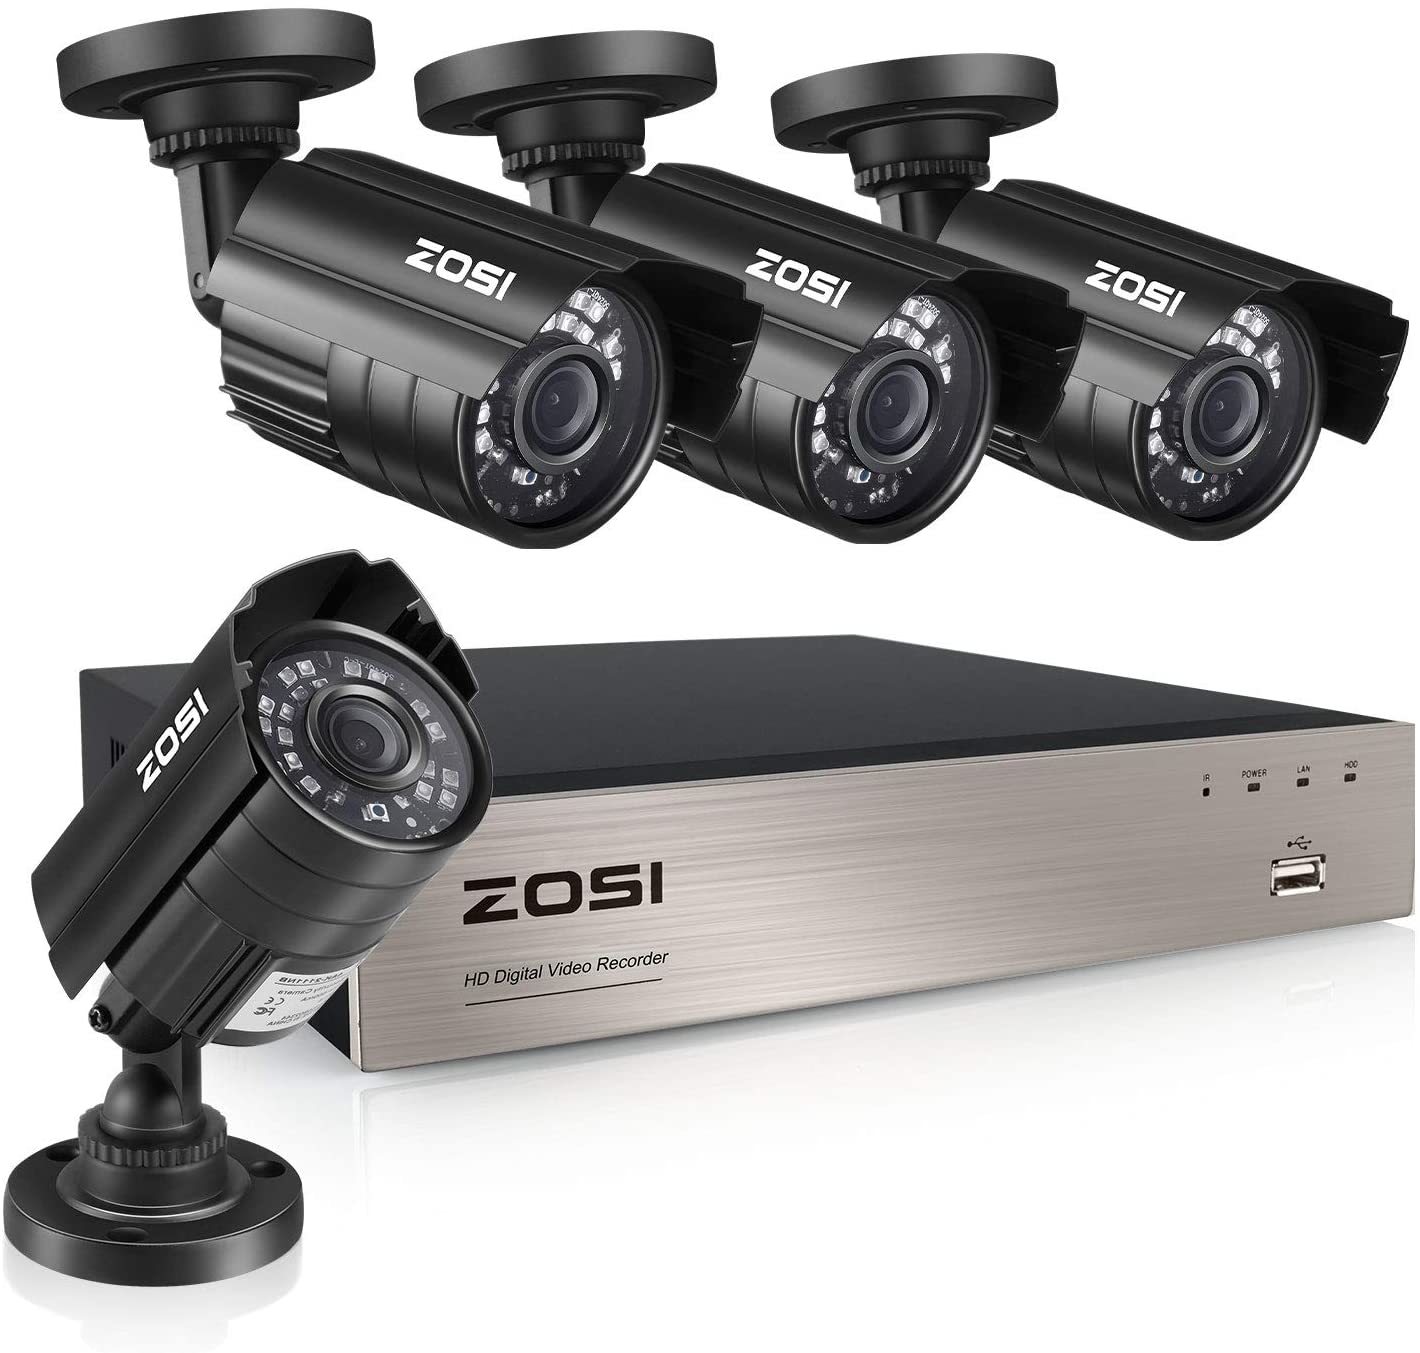 ZOSI Outdoor Security Camera Review